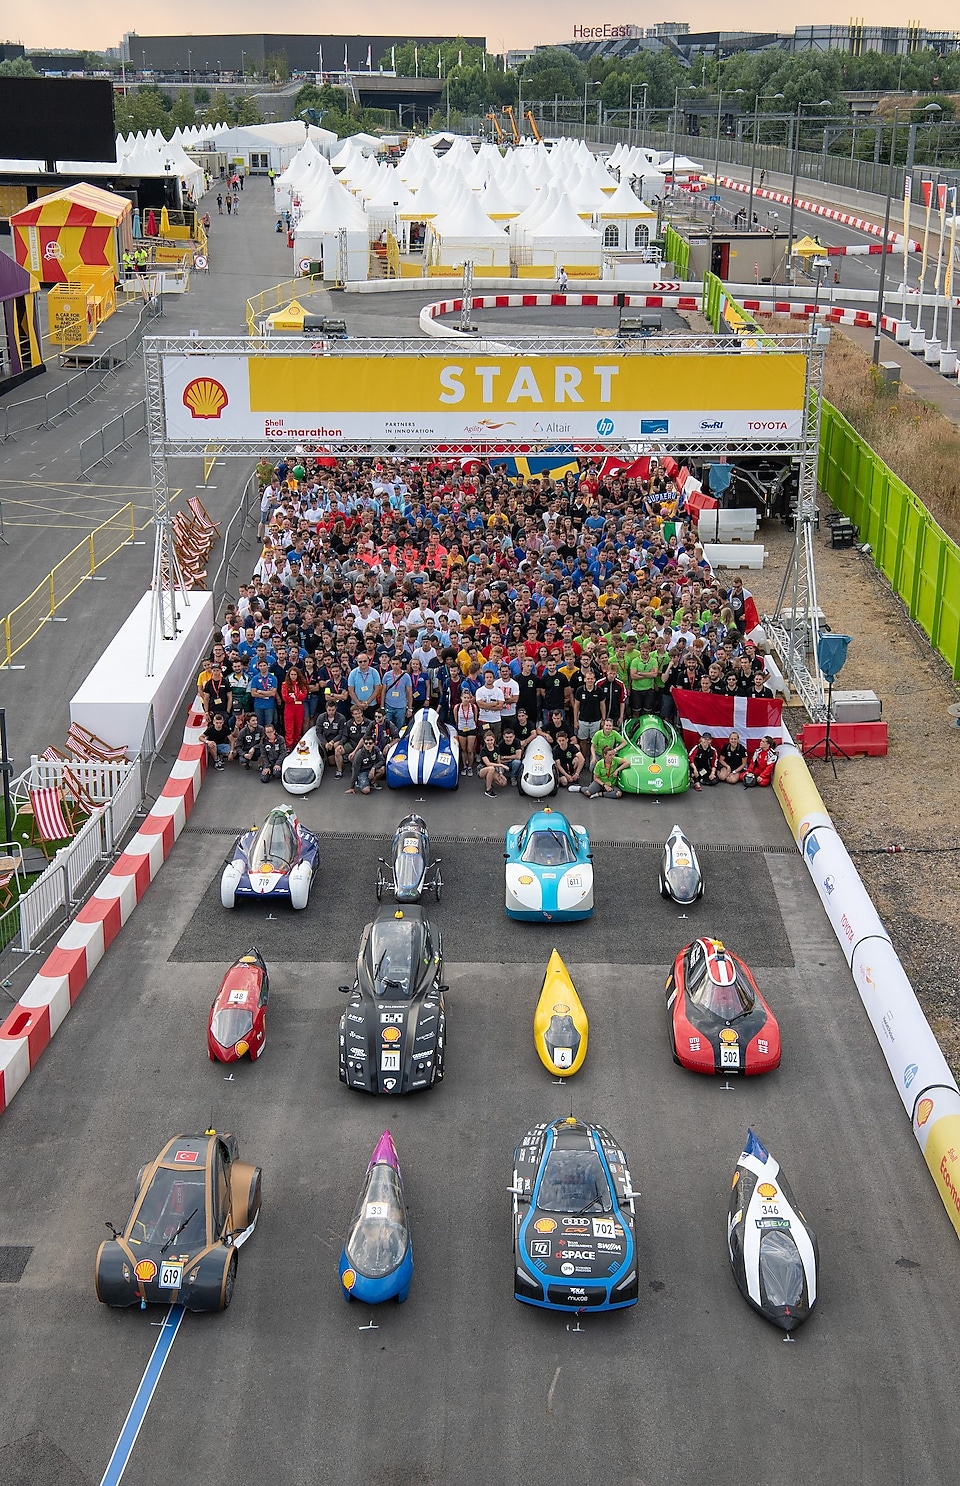 Team members and their cars are lined up on the grid for a group photograph on the eve of Make the Future Live 2018